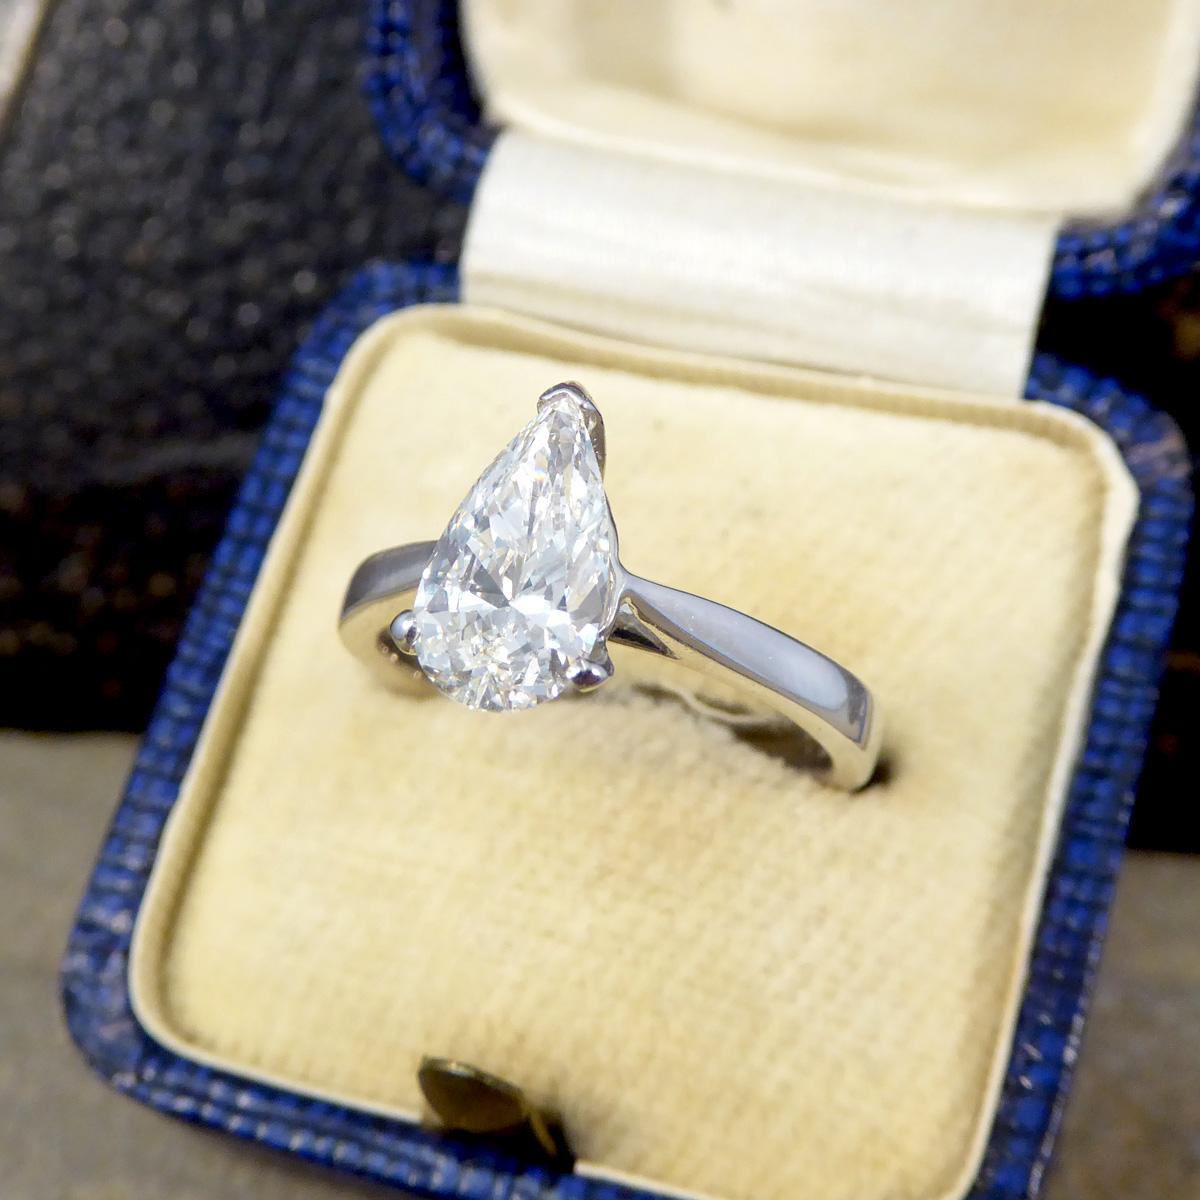 1.42ct Pear Cut Diamond Solitaire Engagement Ring in 18ct White Gold 2